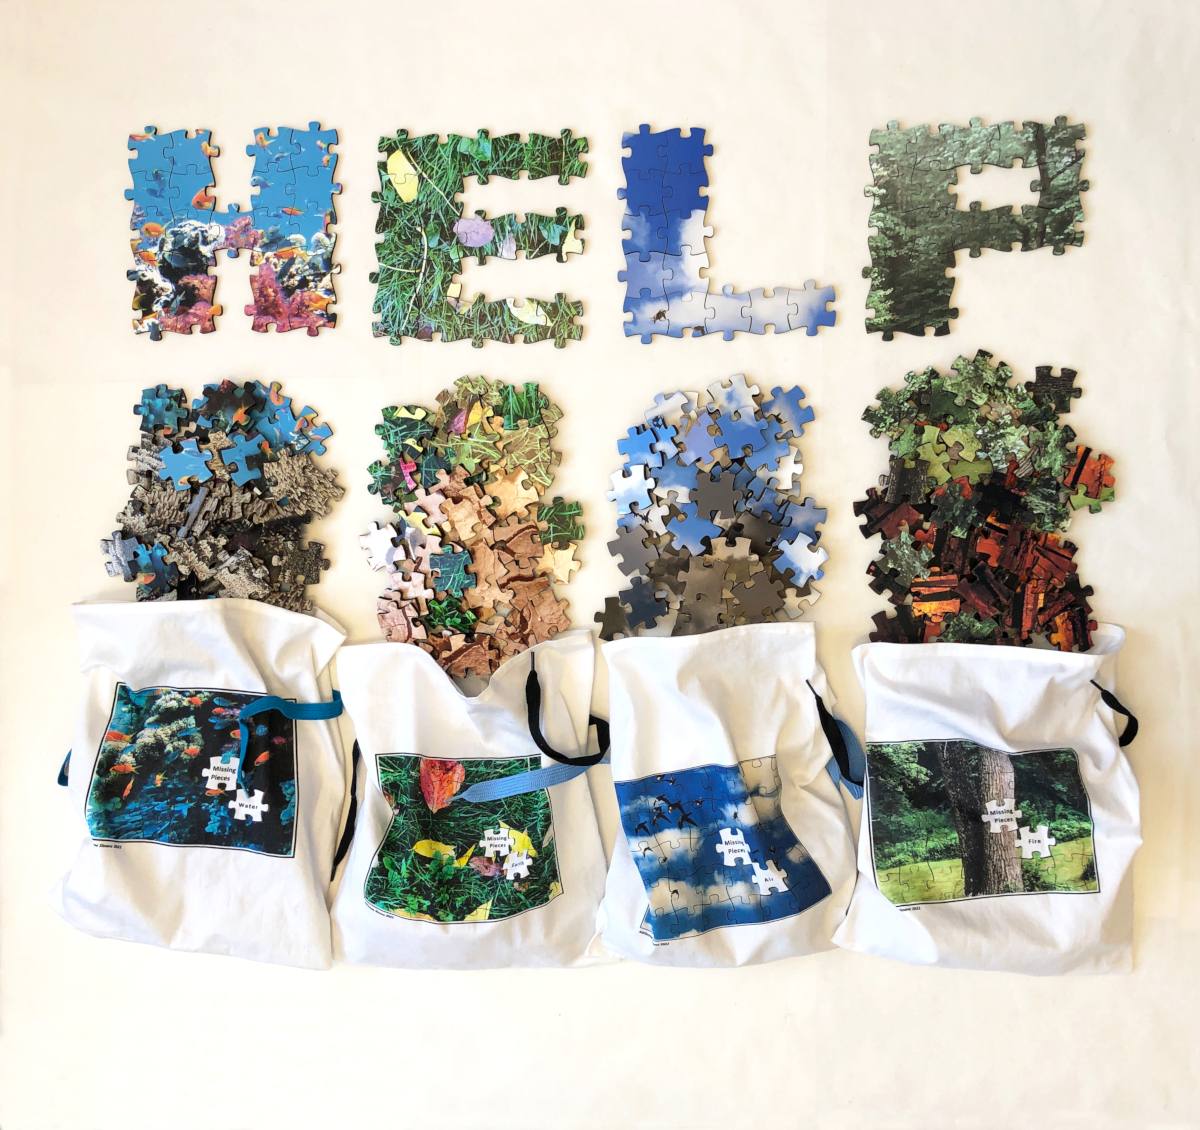 Missing Pieces: Help